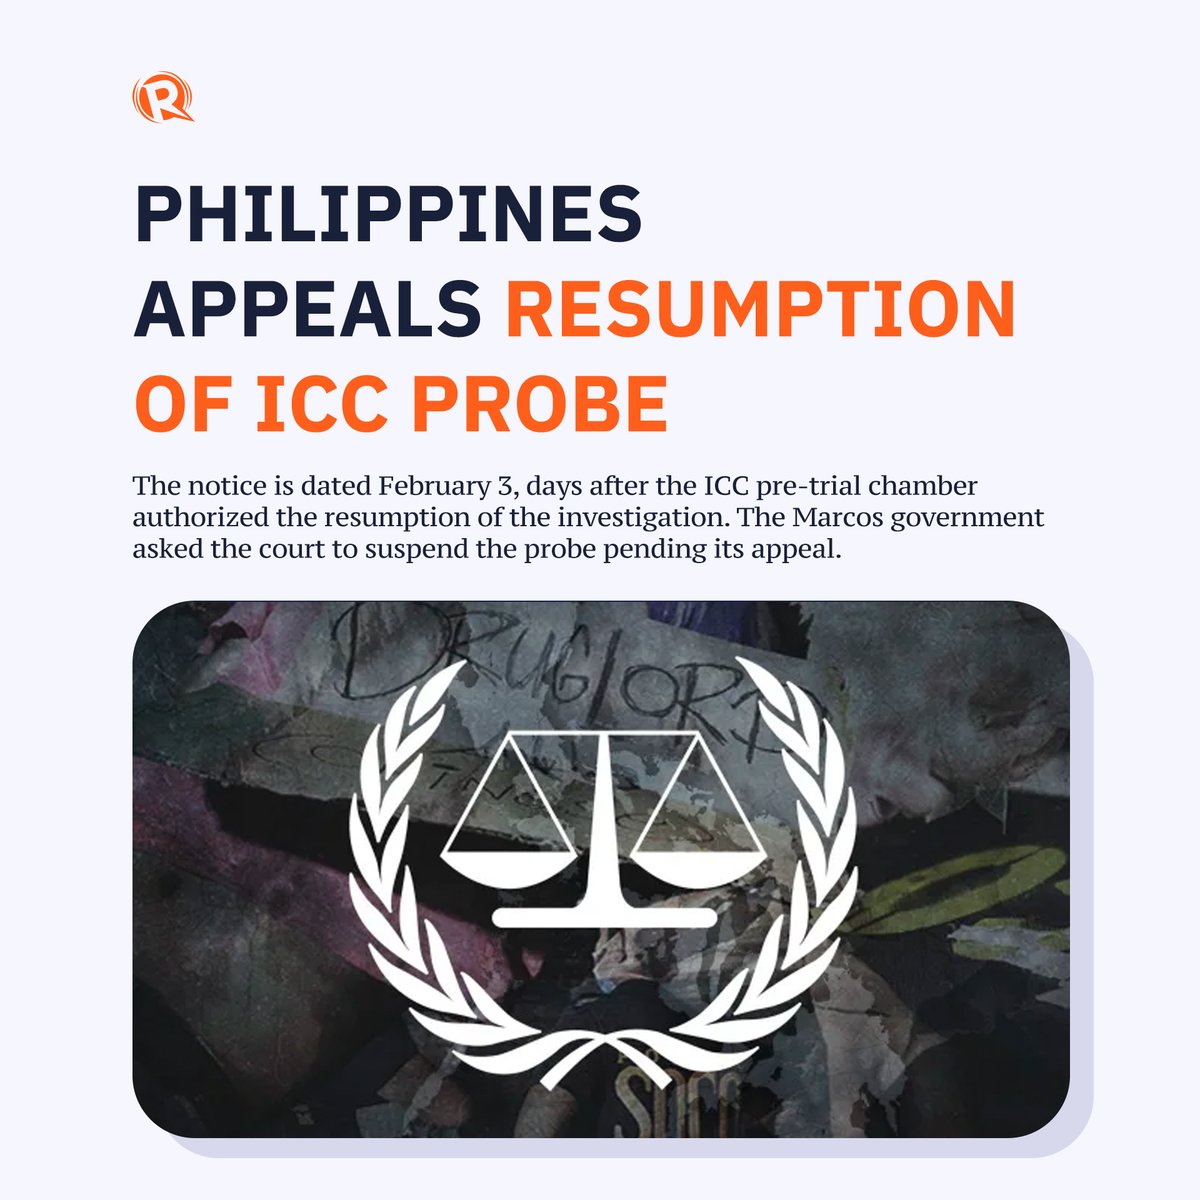 The Philippine government, represented by Solicitor General Menardo Guevarra, has asked the International Criminal Court (ICC) to suspend its decision to resume its probe into the drug war killings in the Philippines under former president Rodrigo Duterte